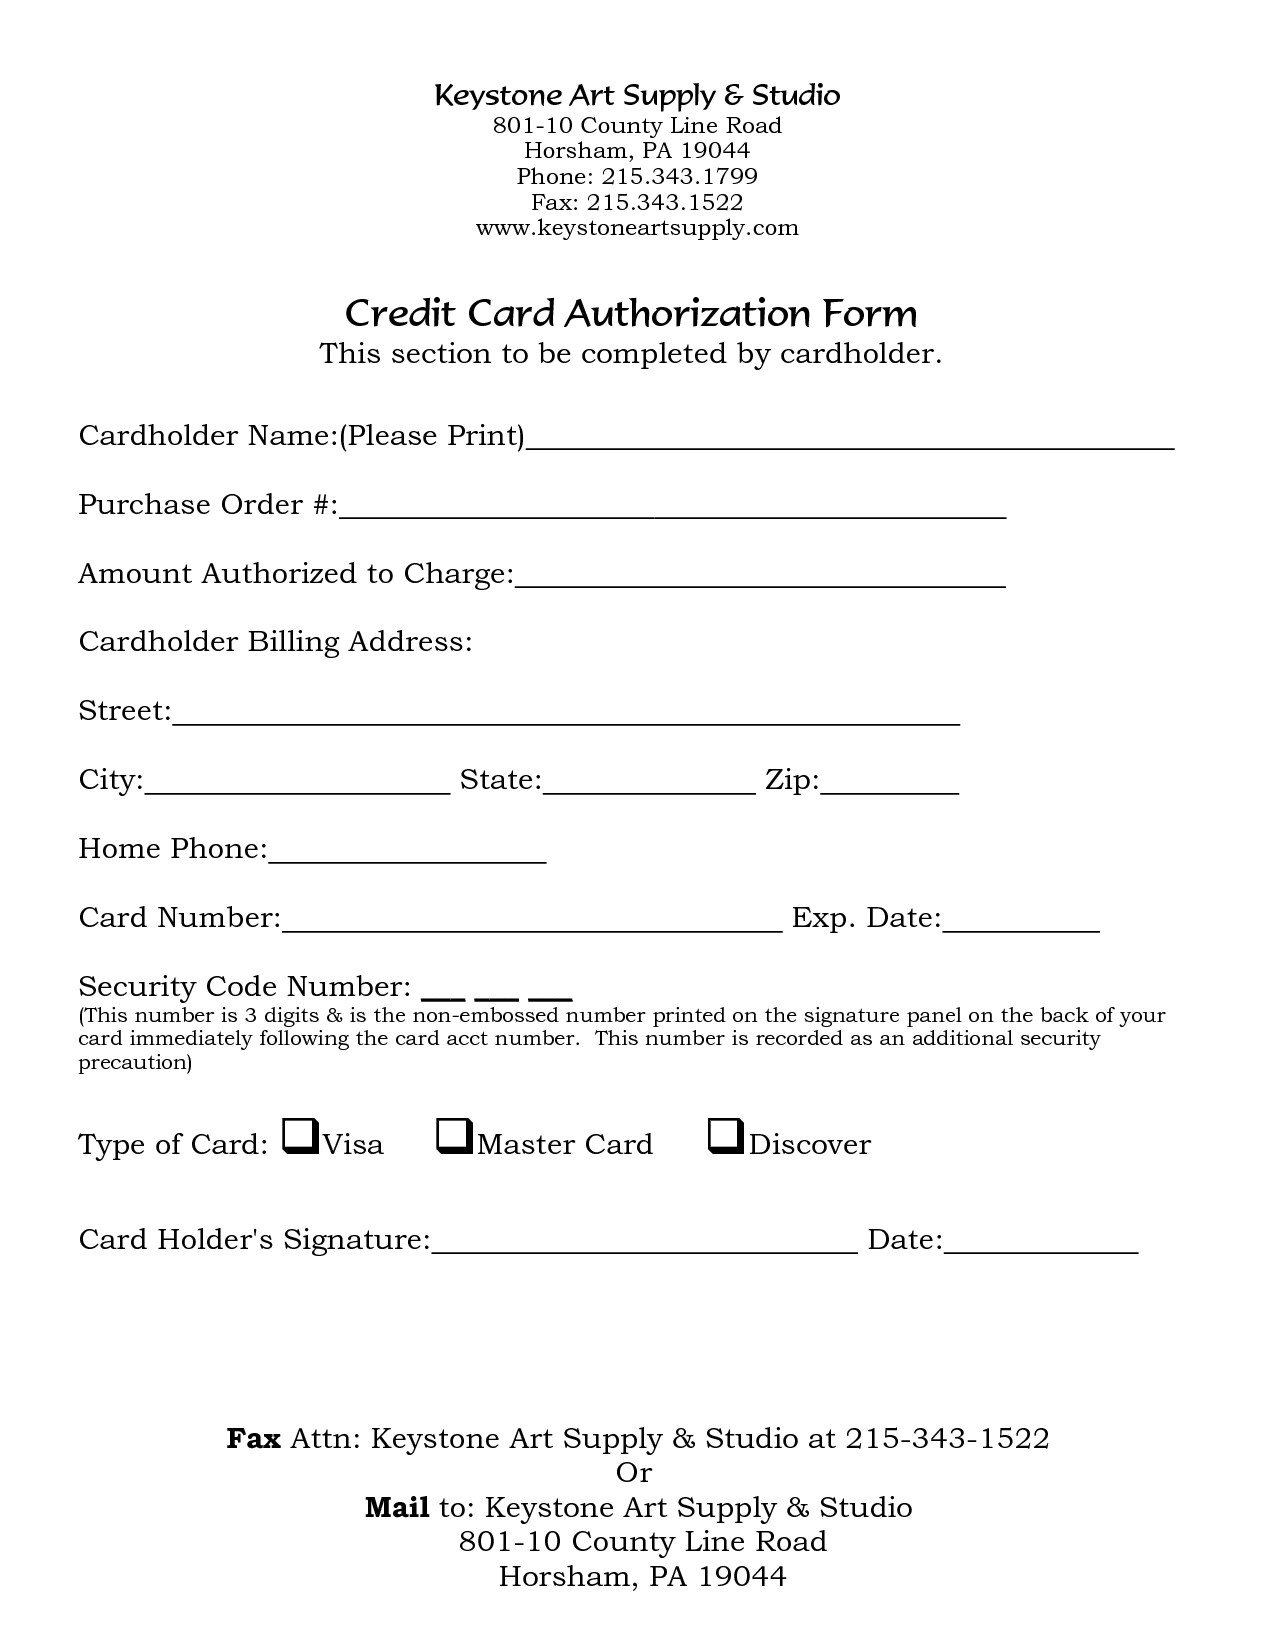 Credit Card Forms Credit Card Authorization Form Calport Pertaining To Credit Card Authorization Form Template Word